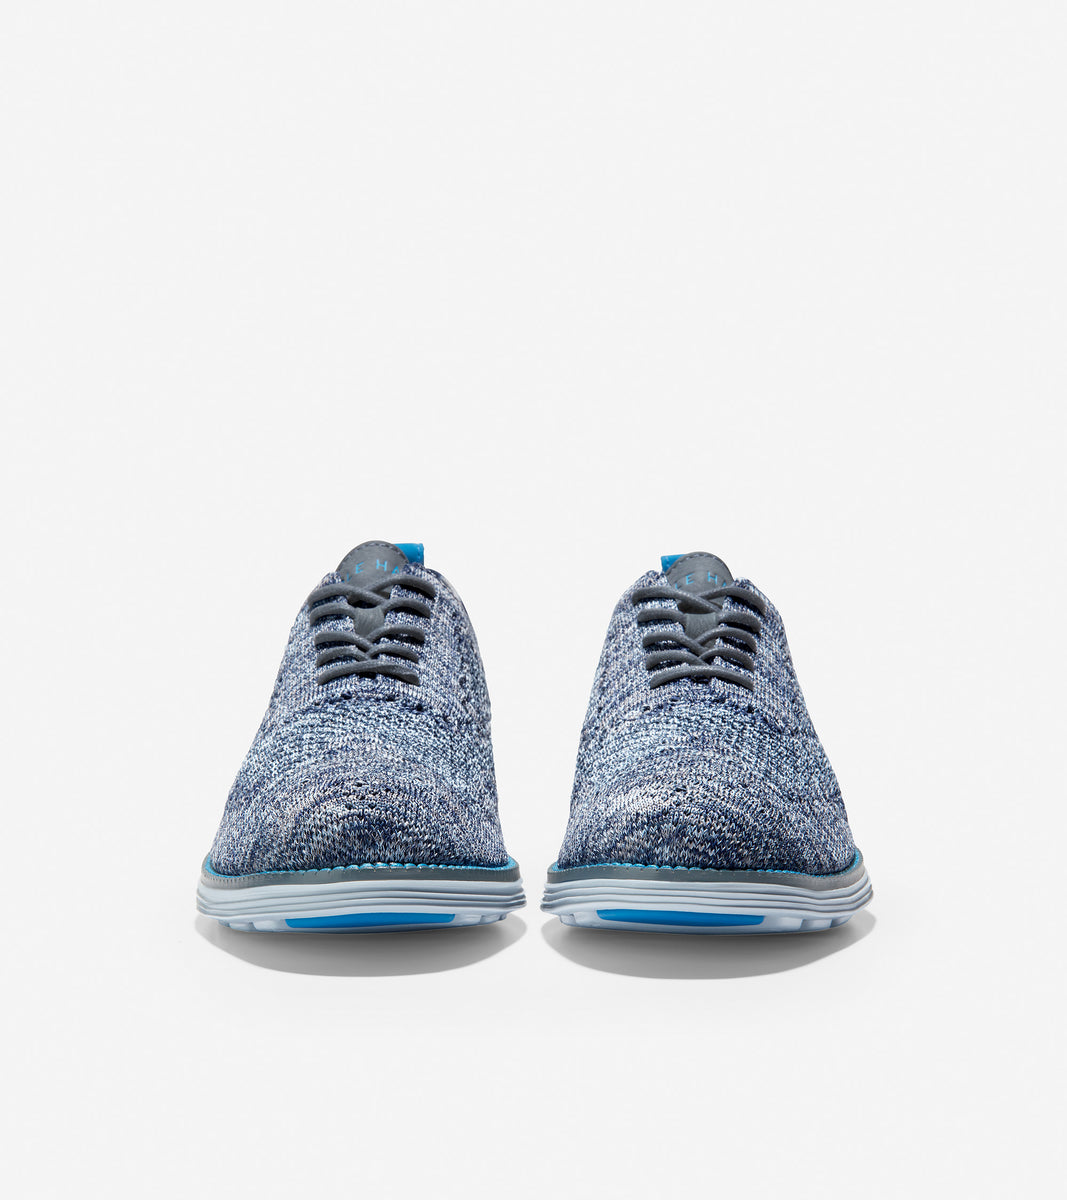 ColeHaan-Original Grand Stitchlite Wing Ox-c33609-OMBRE BLUE TWISTED KNIT/COOL GRAY